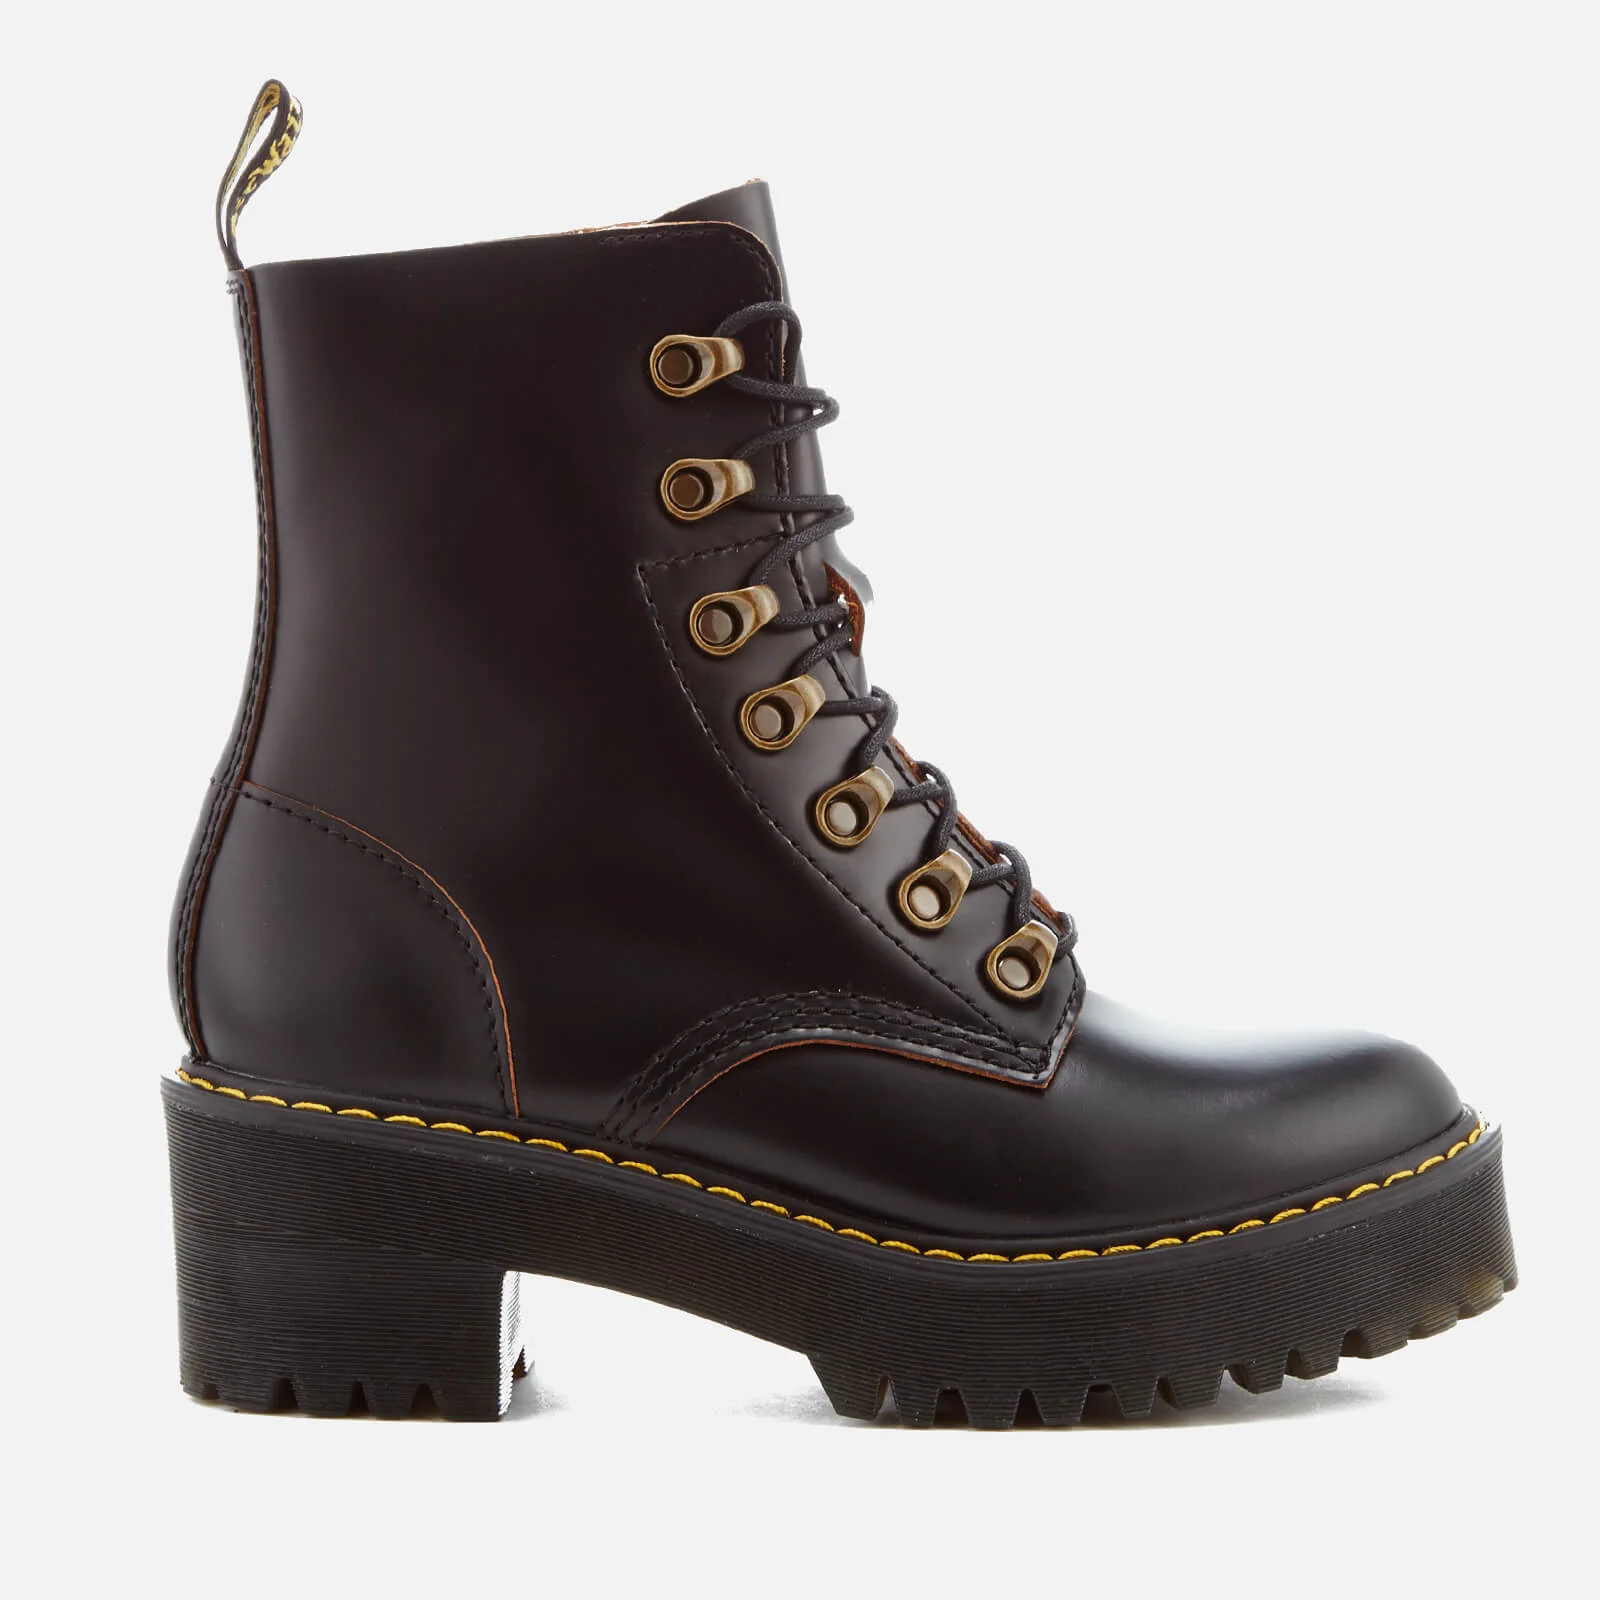 Dr. Martens Women's Leona Leather Lace Up Heeled Boots - Black Image 1